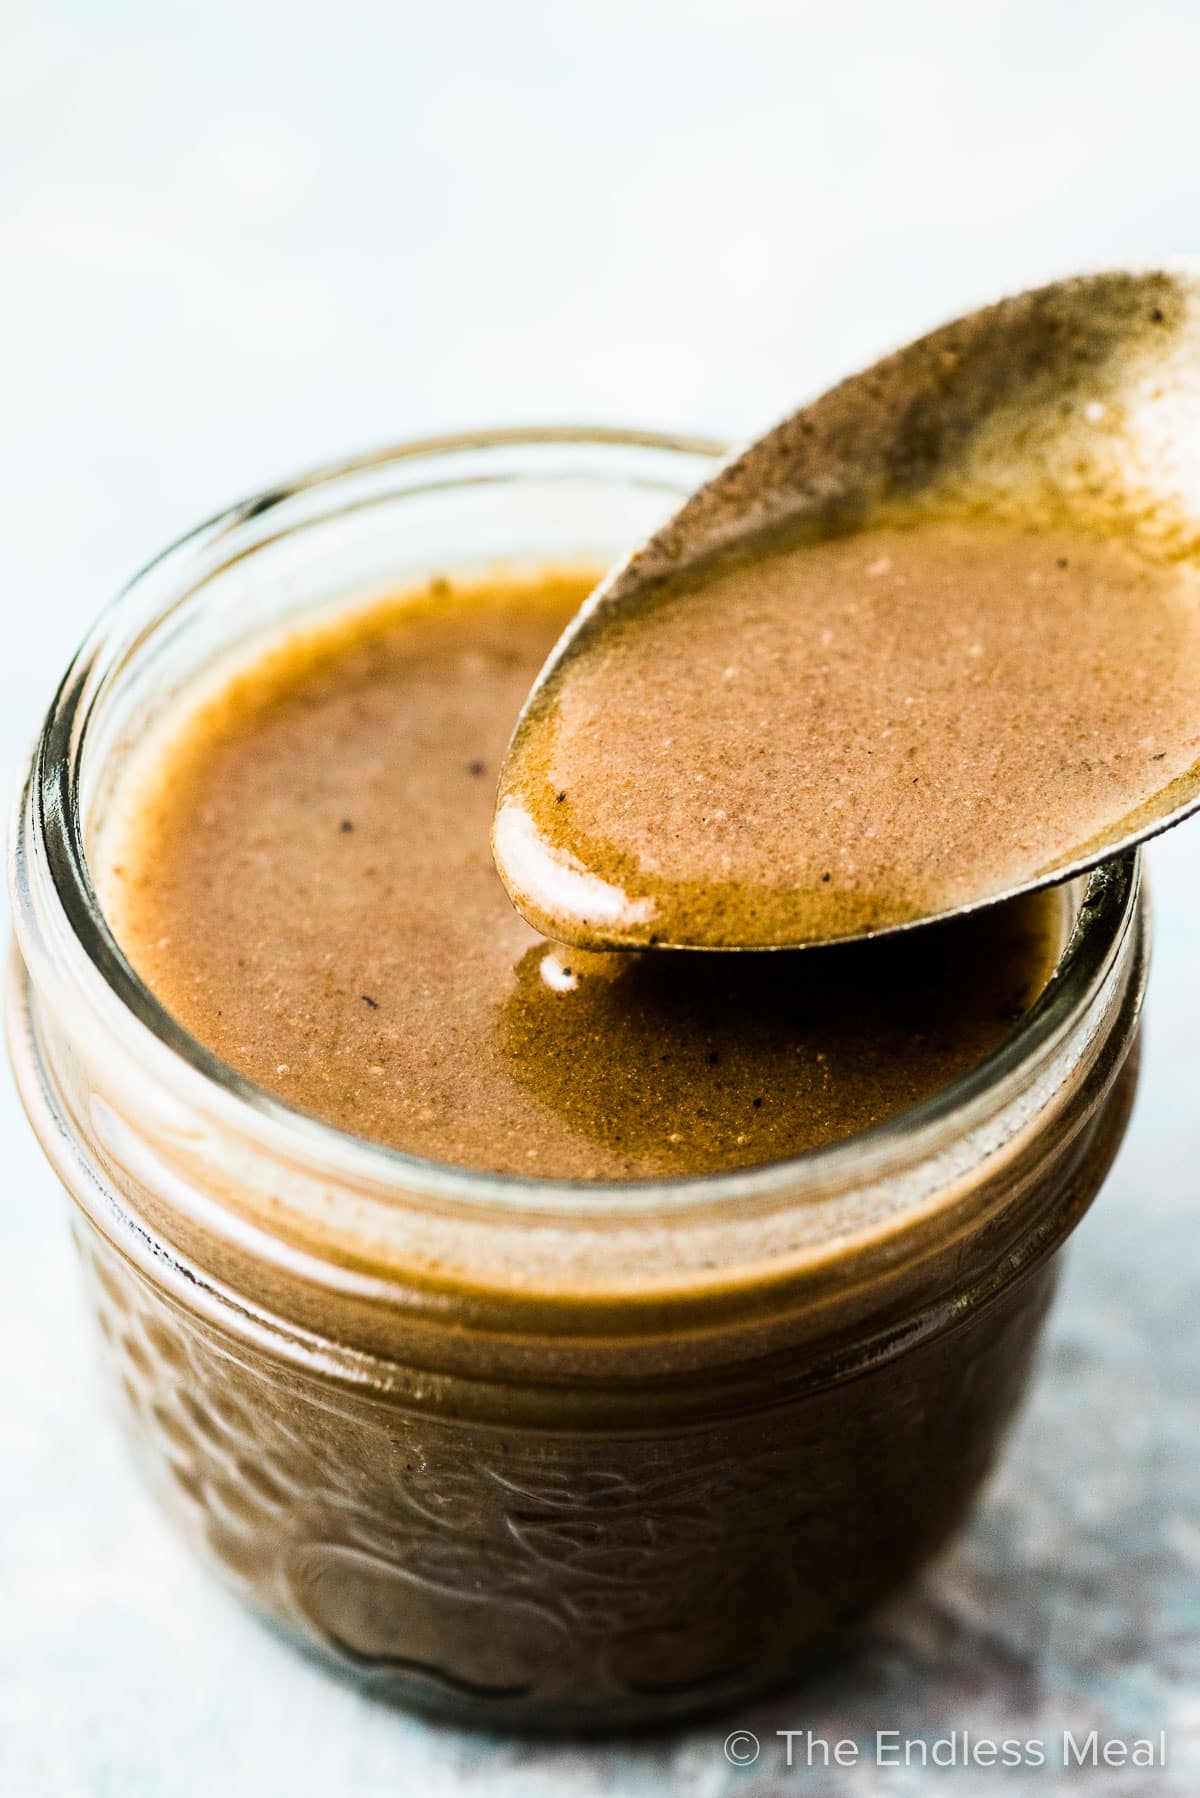 Brown butter vinaigrette in a small glass jar with a spoon.